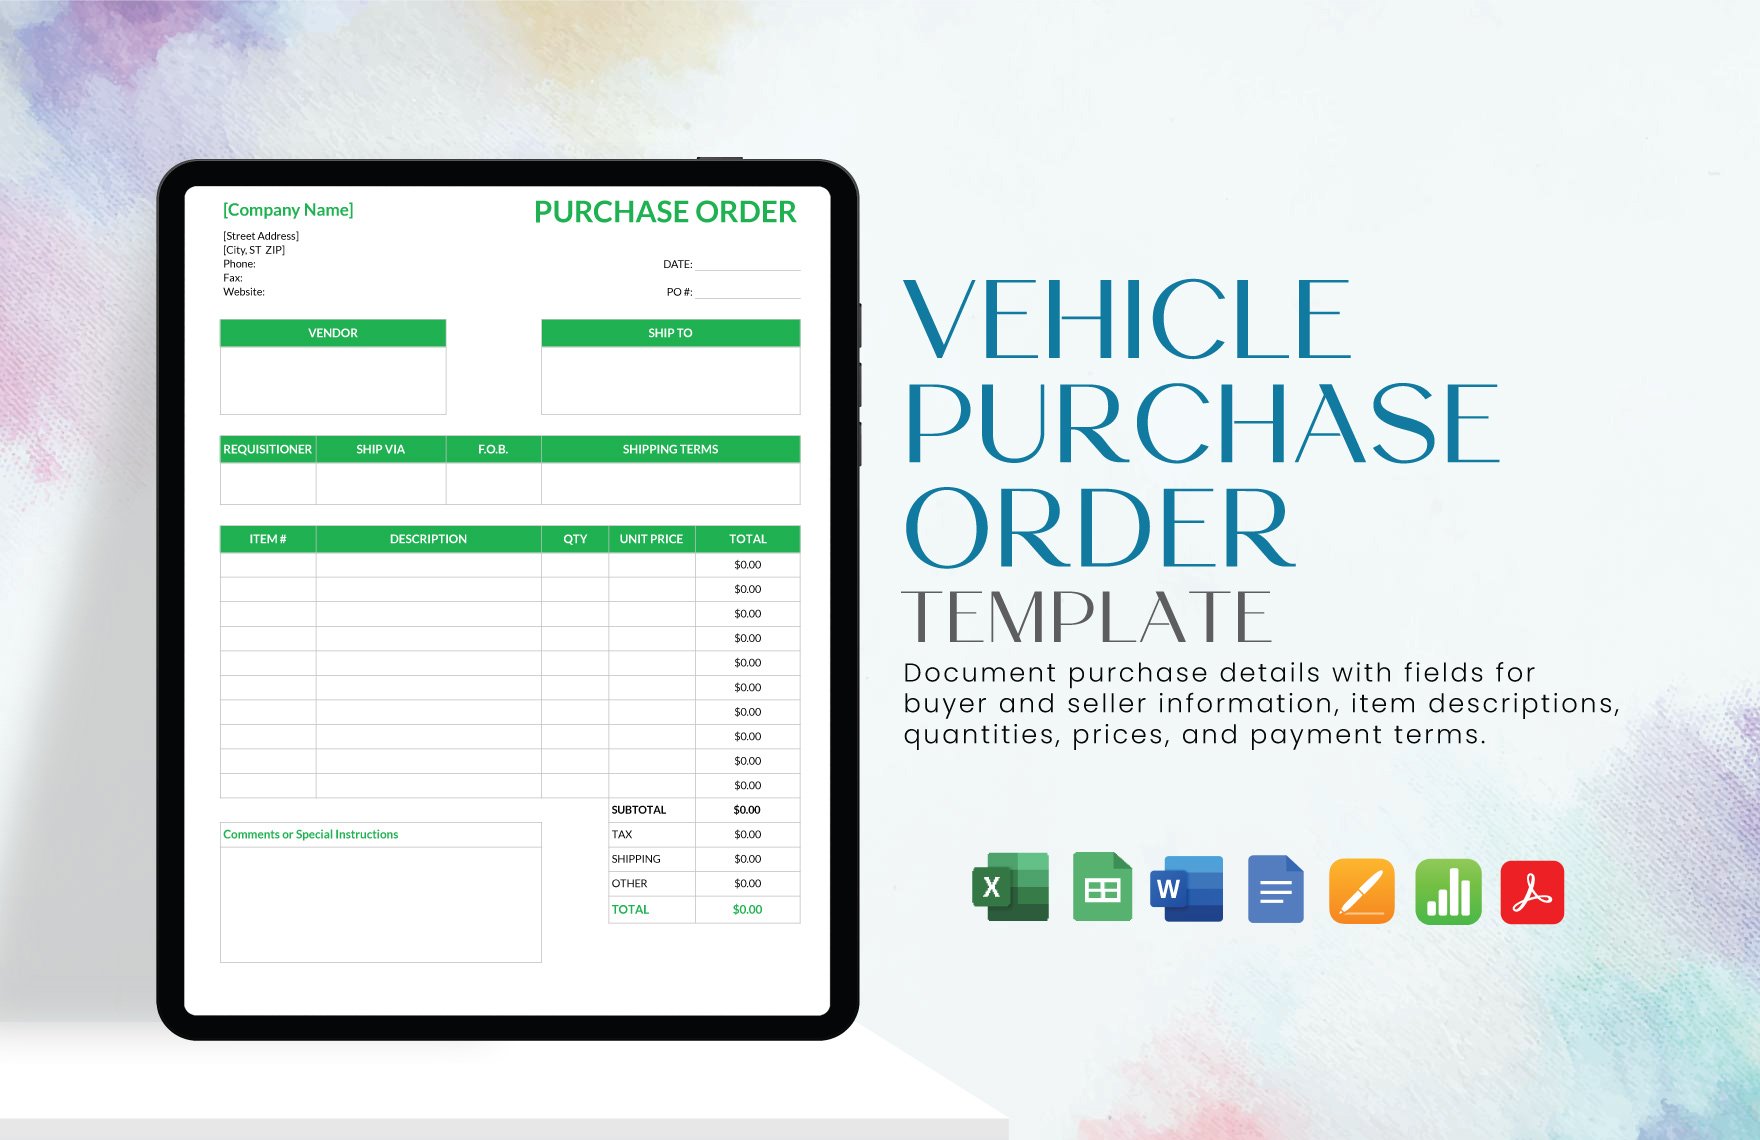 Blank Purchase Order Template in Word, Google Docs, Excel, PDF, Google Sheets, Apple Pages, Apple Numbers